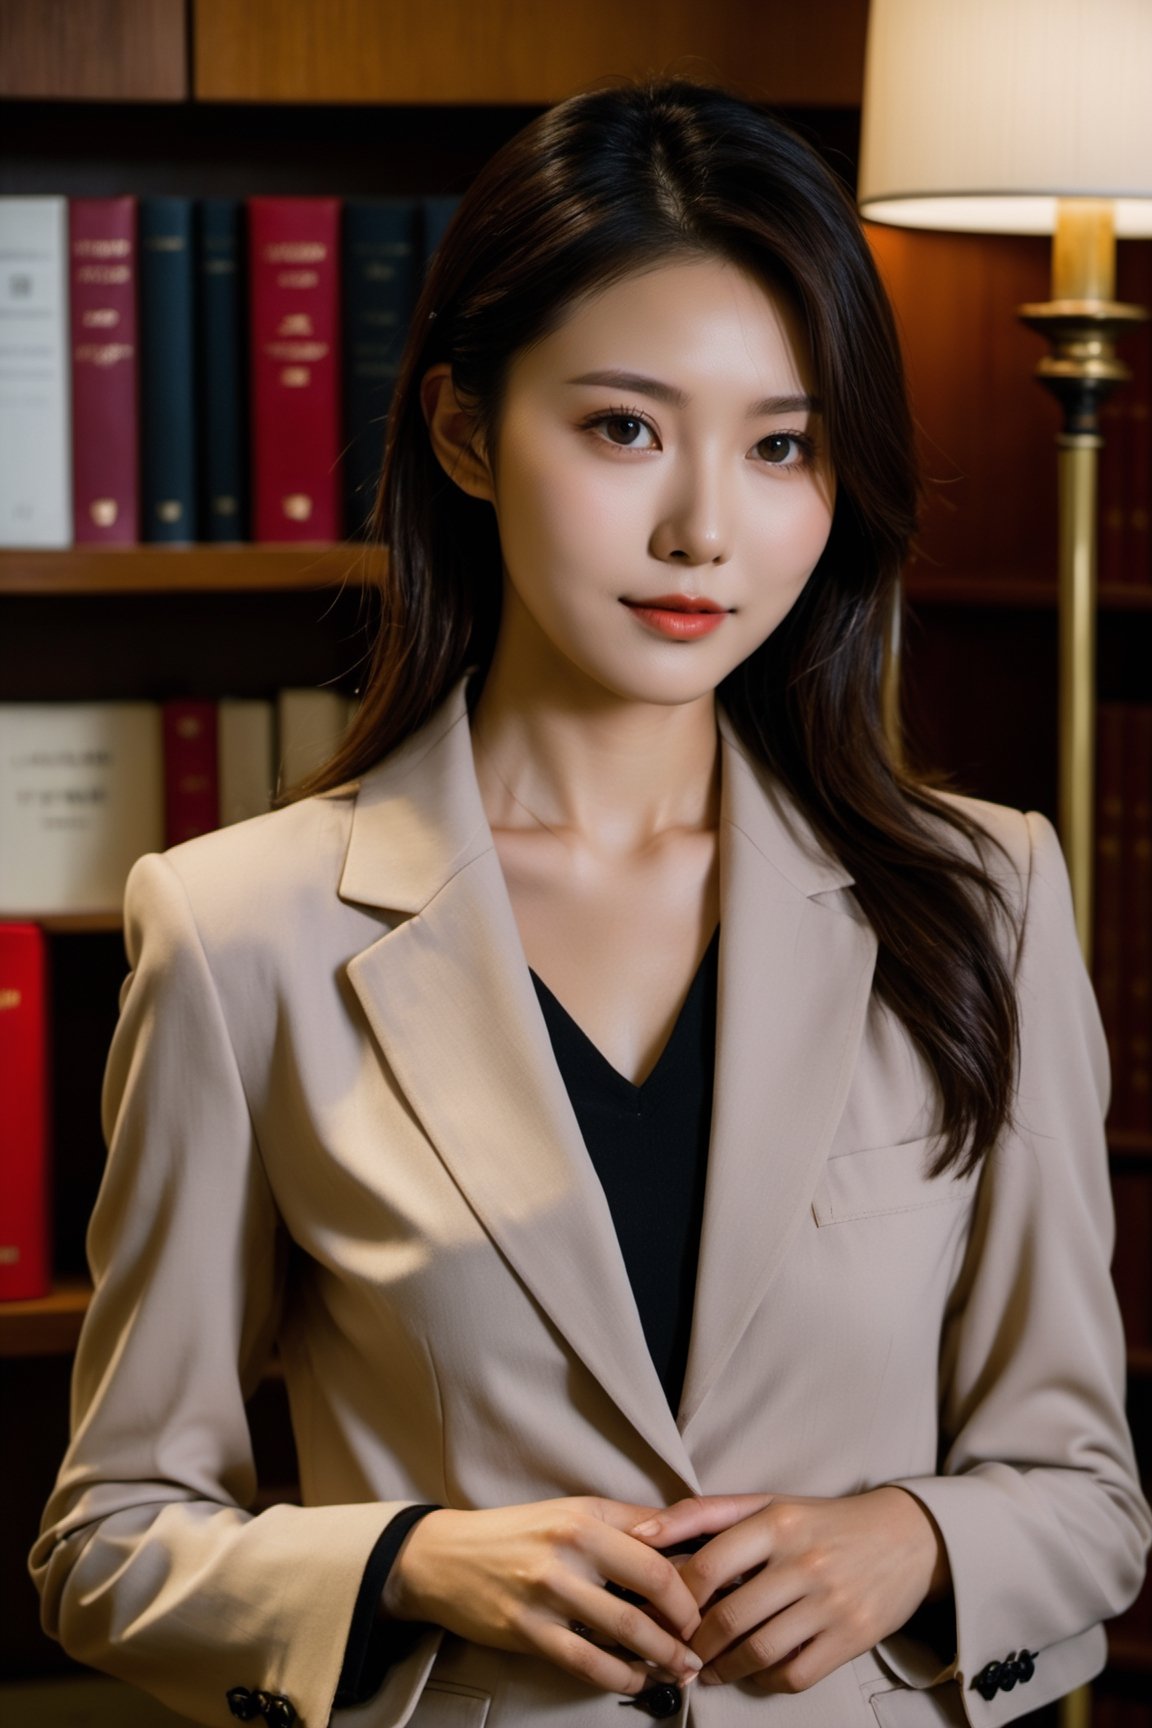 xxmix_girl, 1girl, Realistic, Candid Photo of an Asian female lawyer, scene set in a well-furnished office, books lining the shelves behind her, warm color temperature, calm demeanor emphasized, soft smile, (black pantyhose), hint of contentment evident, captured using a 50mm lens, balance between subject and surroundings, natural lighting from a nearby window, gentle shadows cast, serene atmosphere